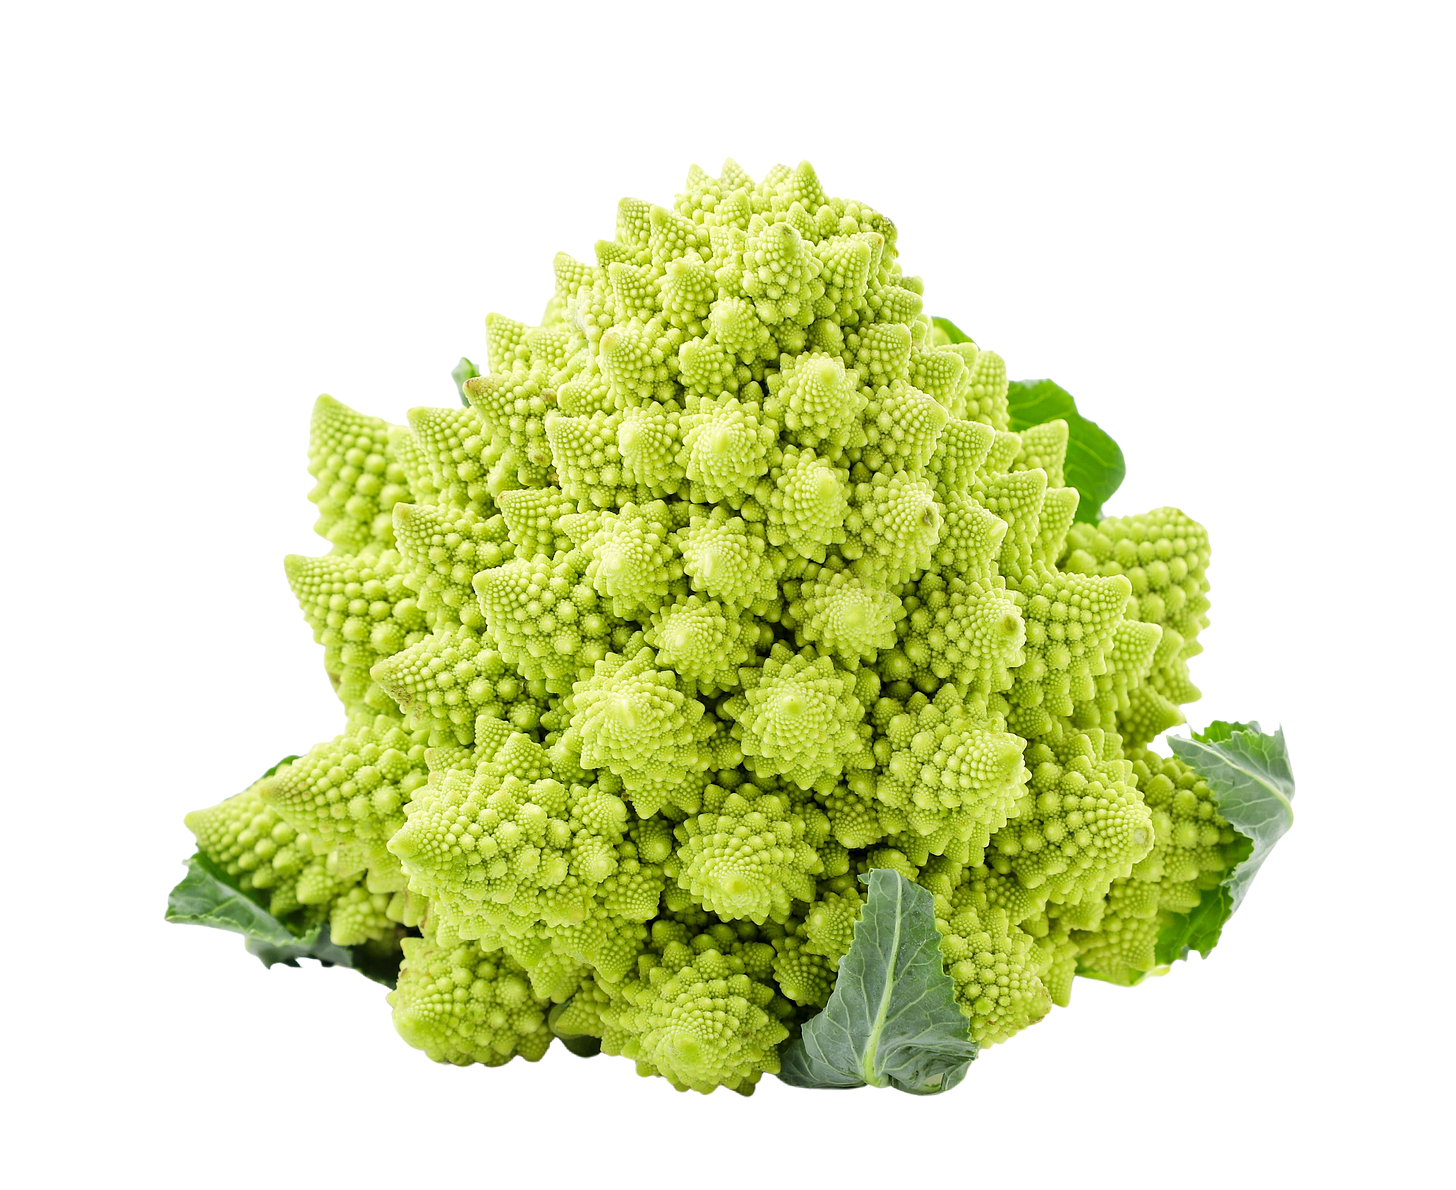 Alright, blind people, ever felt a pinecone? Imagine lots of pinecones of smaller and smaller size smooshed together into one freaky looking vegetable, that's the Romanesco cauliflower for you.